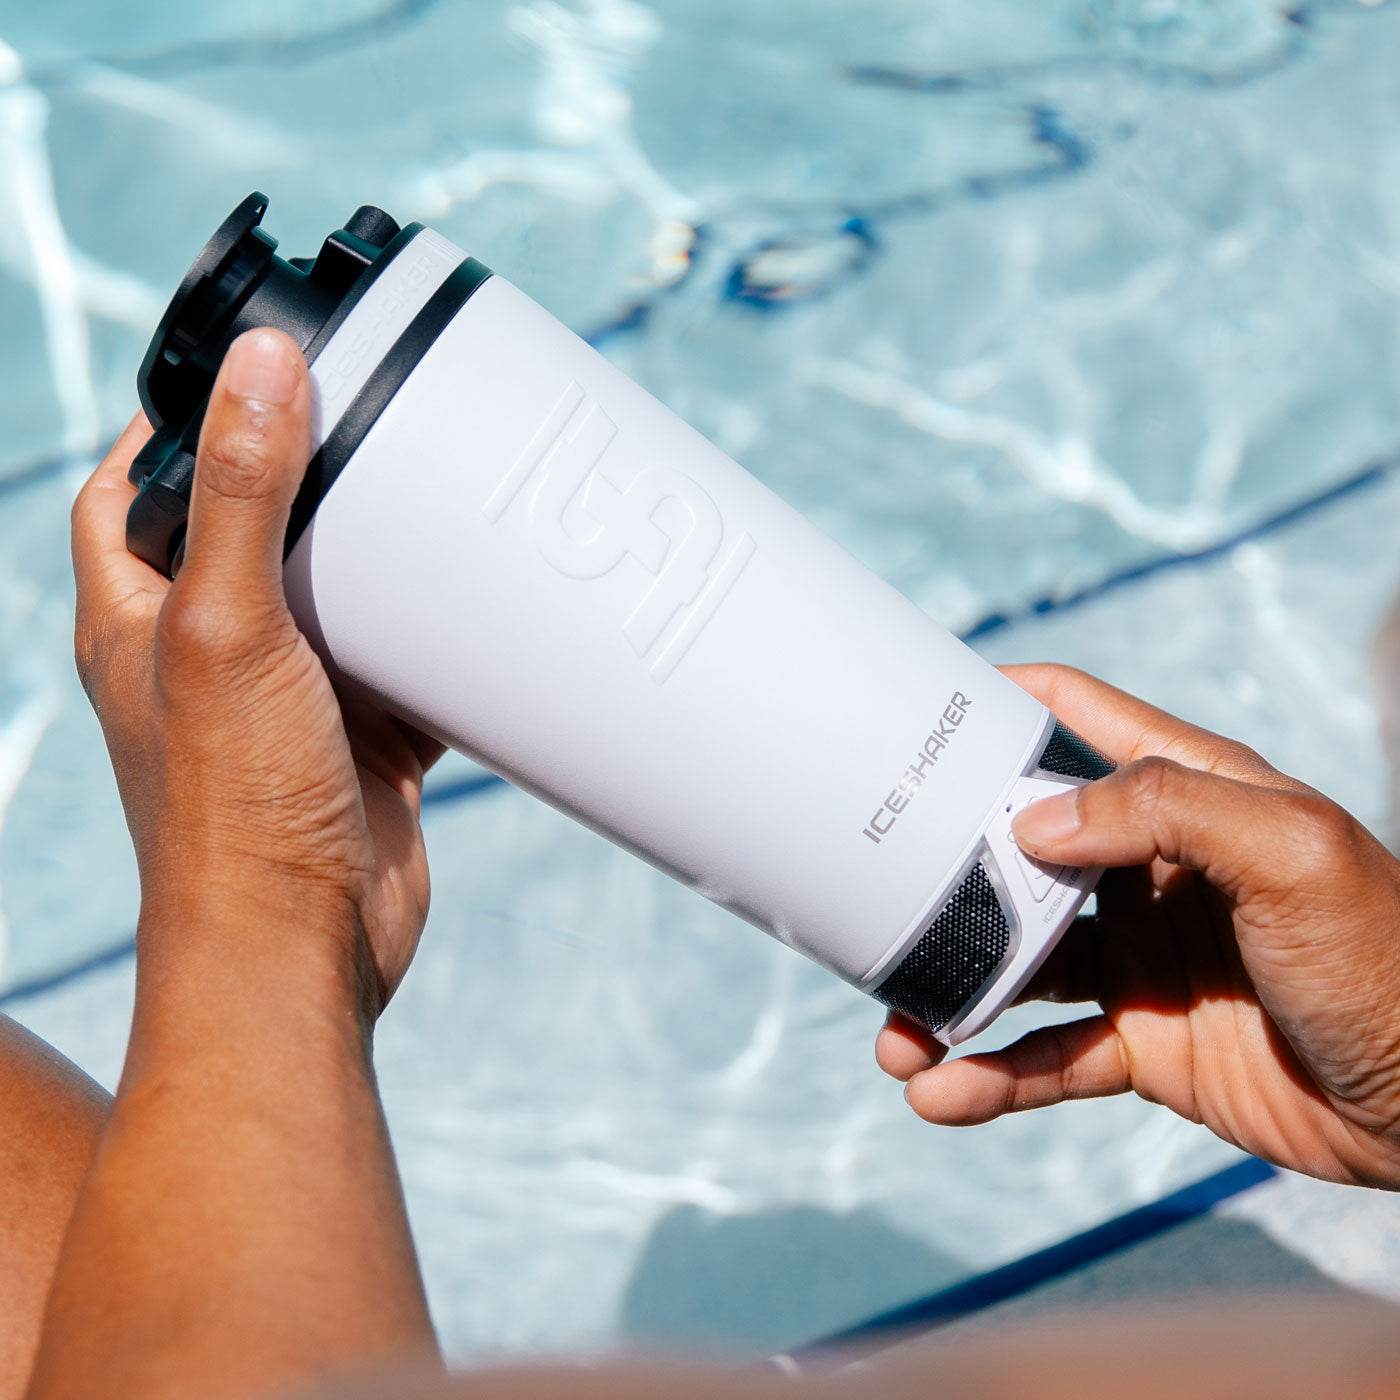 an image of the White 20oz Speaker Bottle being held by two hands. One hand is pressing the power button on the Bumpboxx Speaker that's twists on the bottom of the 20oz Speaker Bottle. There is a pool in the background of the image.